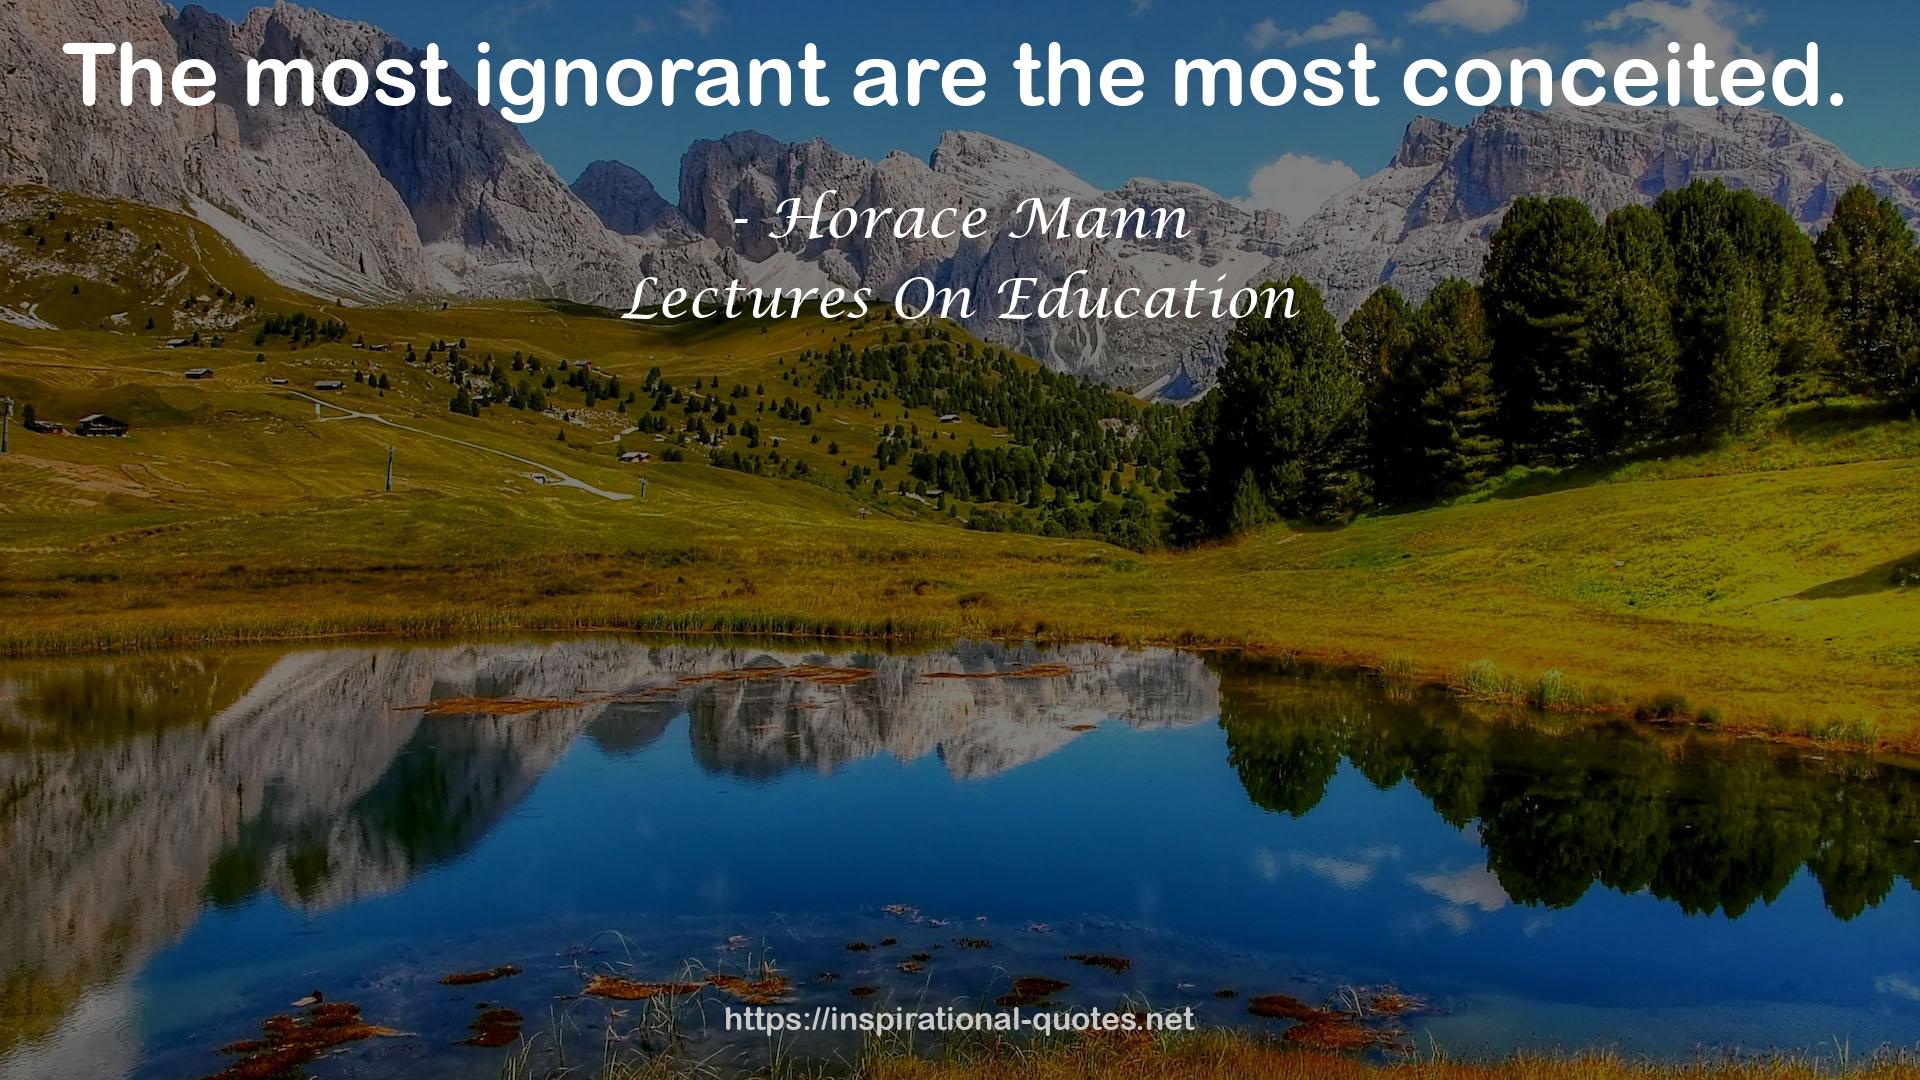 Lectures On Education QUOTES